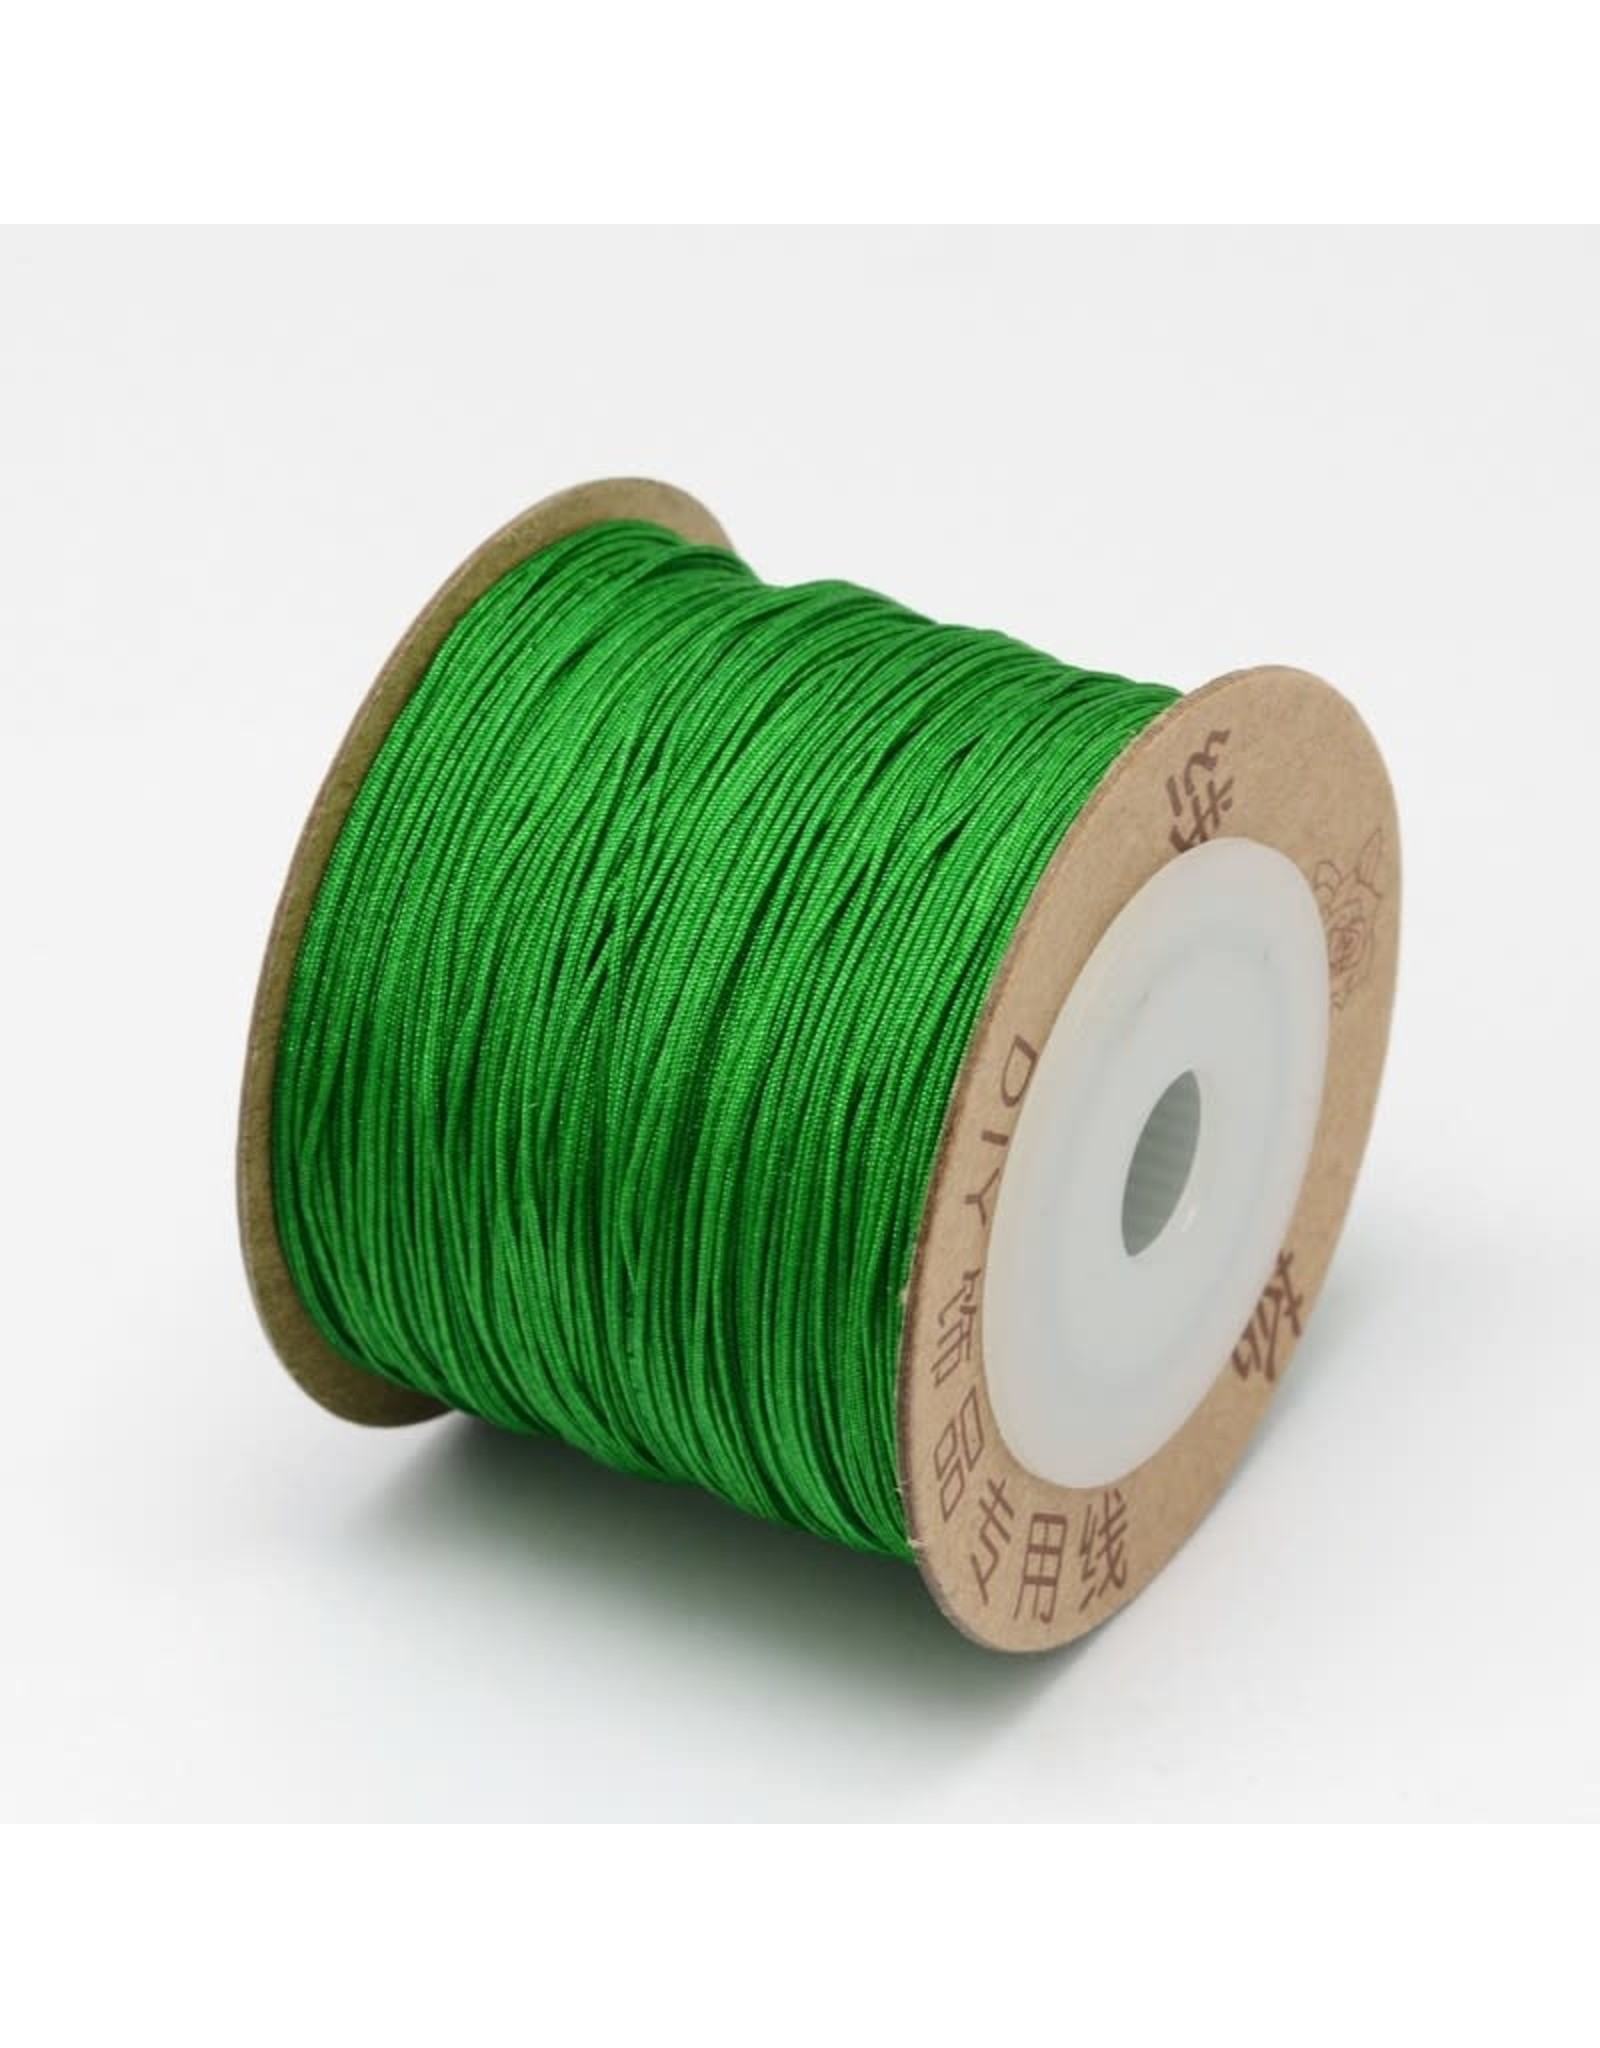 Chinese Knotting Cord .8mm Lime Green  x100m